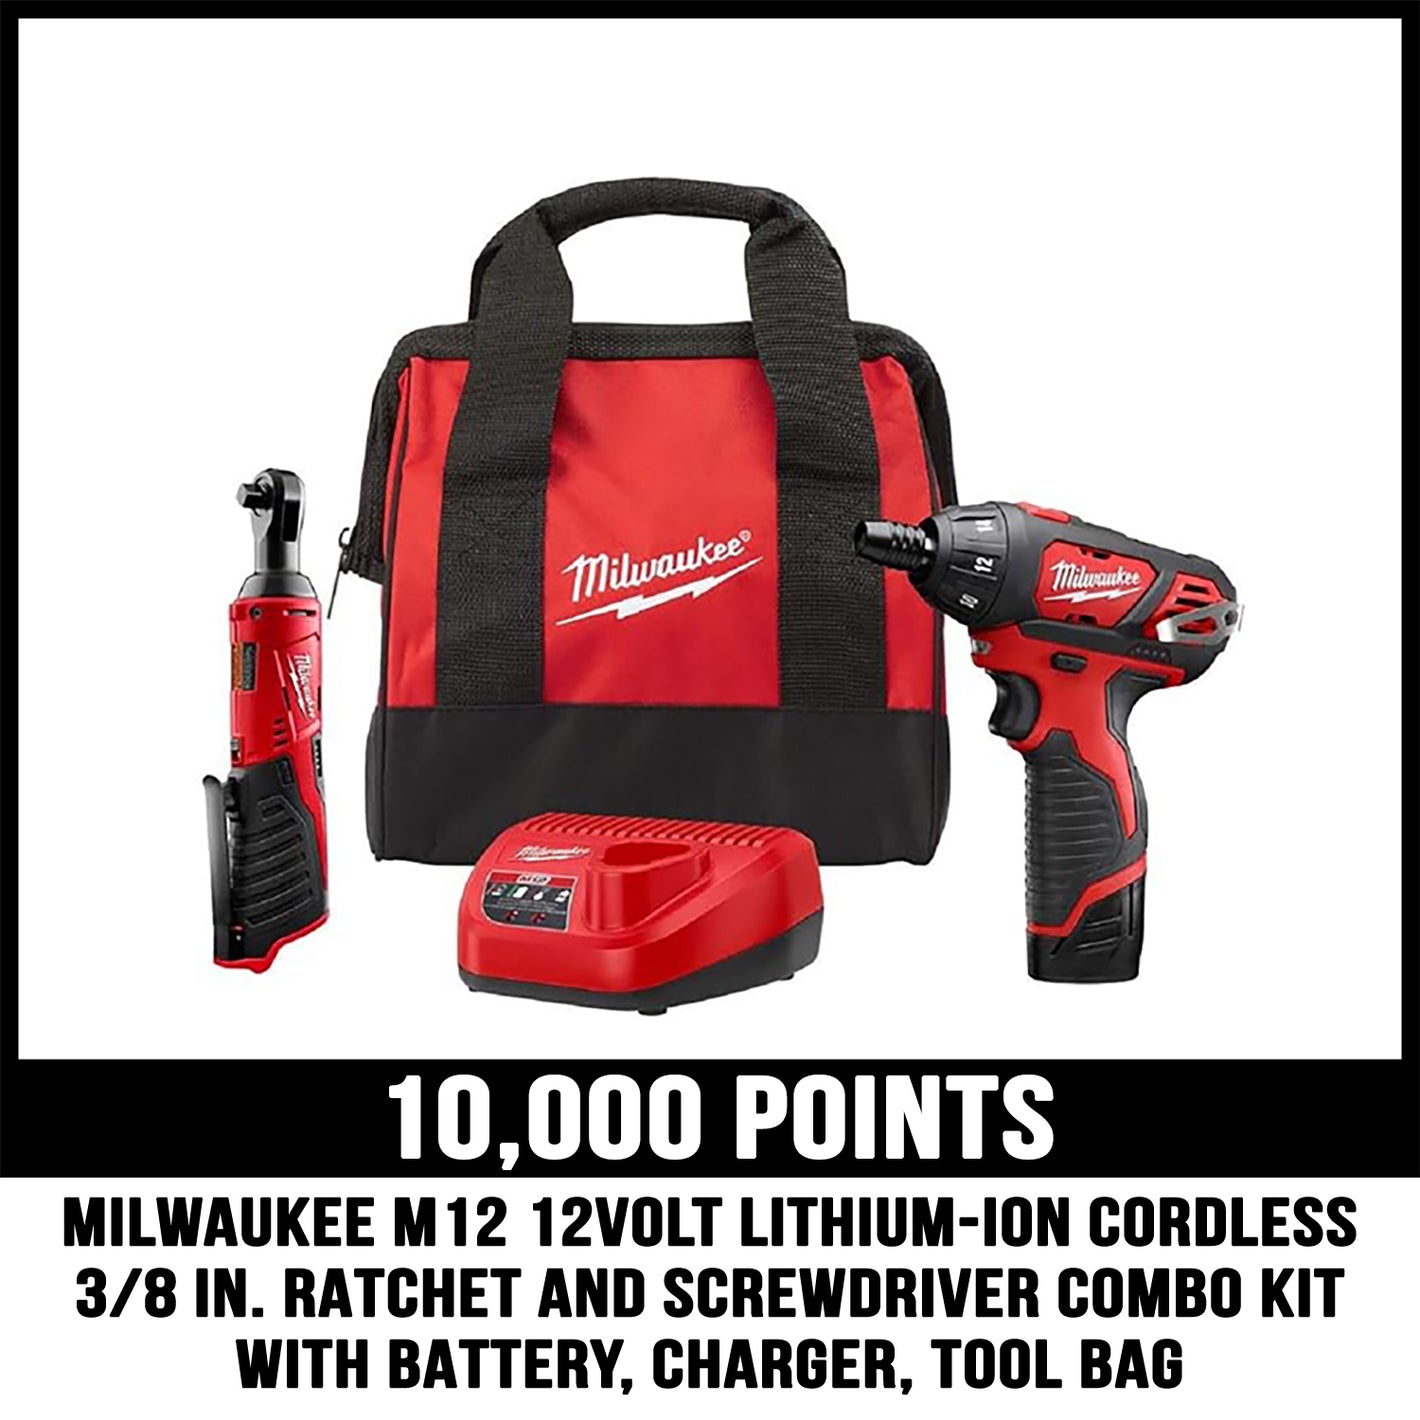 Milwaukee M12 tool kit prize for 10000 points